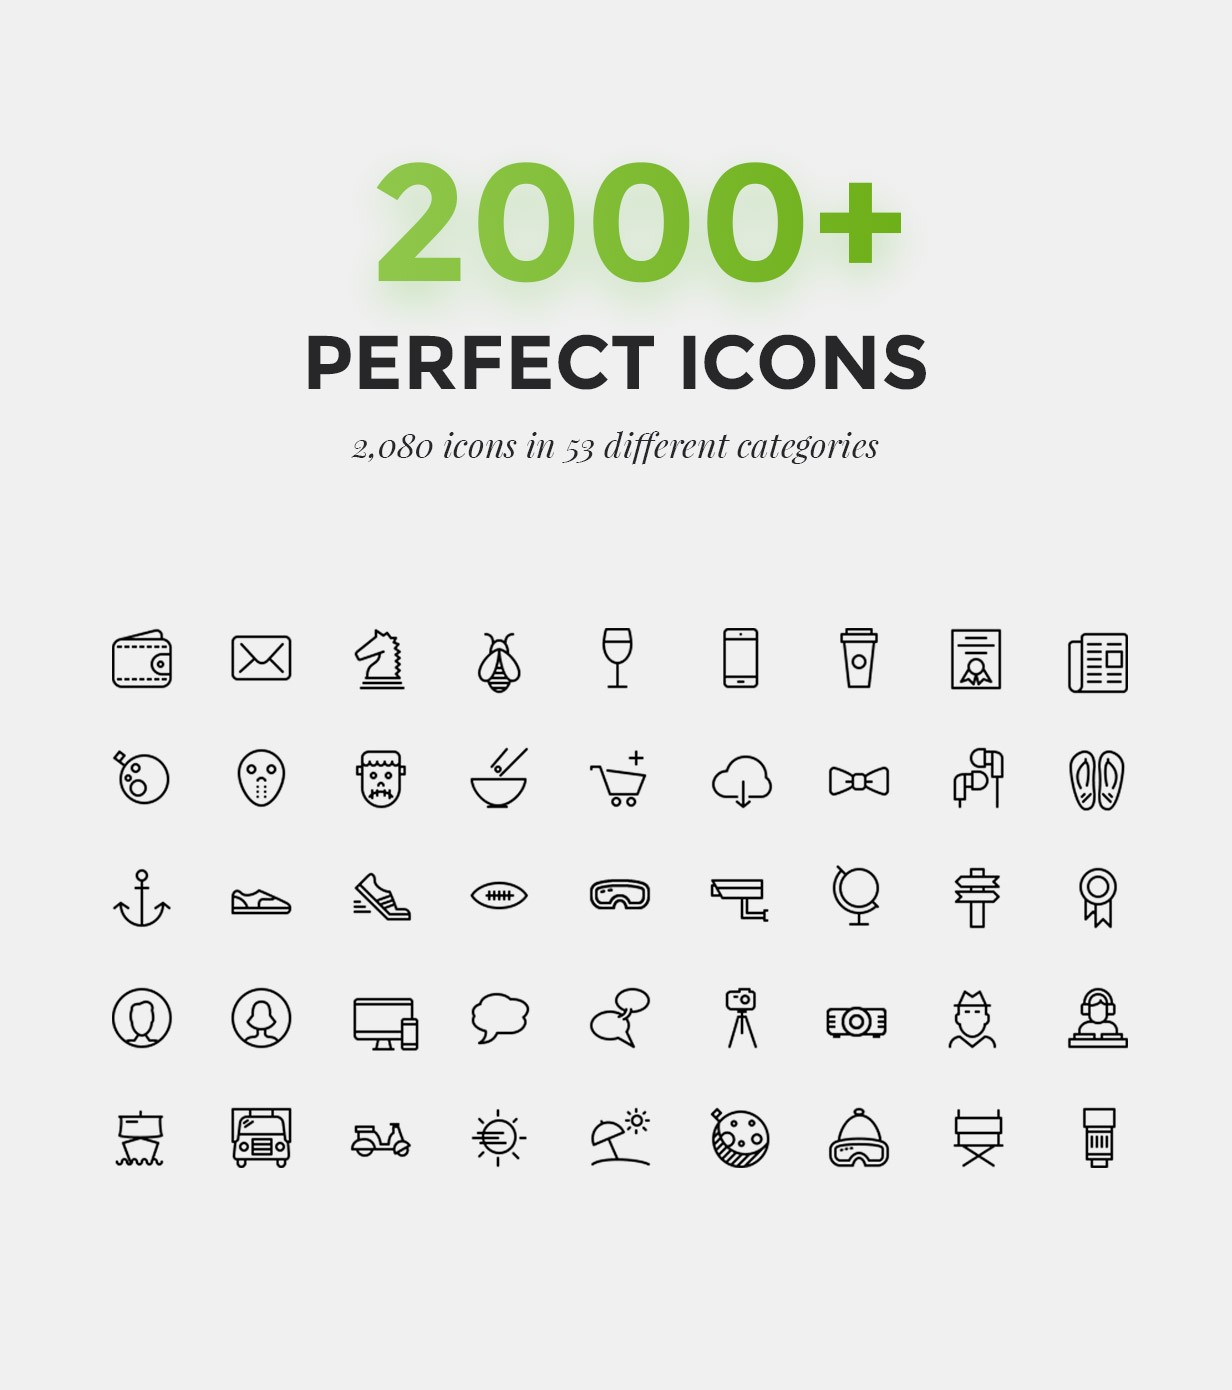 2000 Amazing Icons for 53 Categories